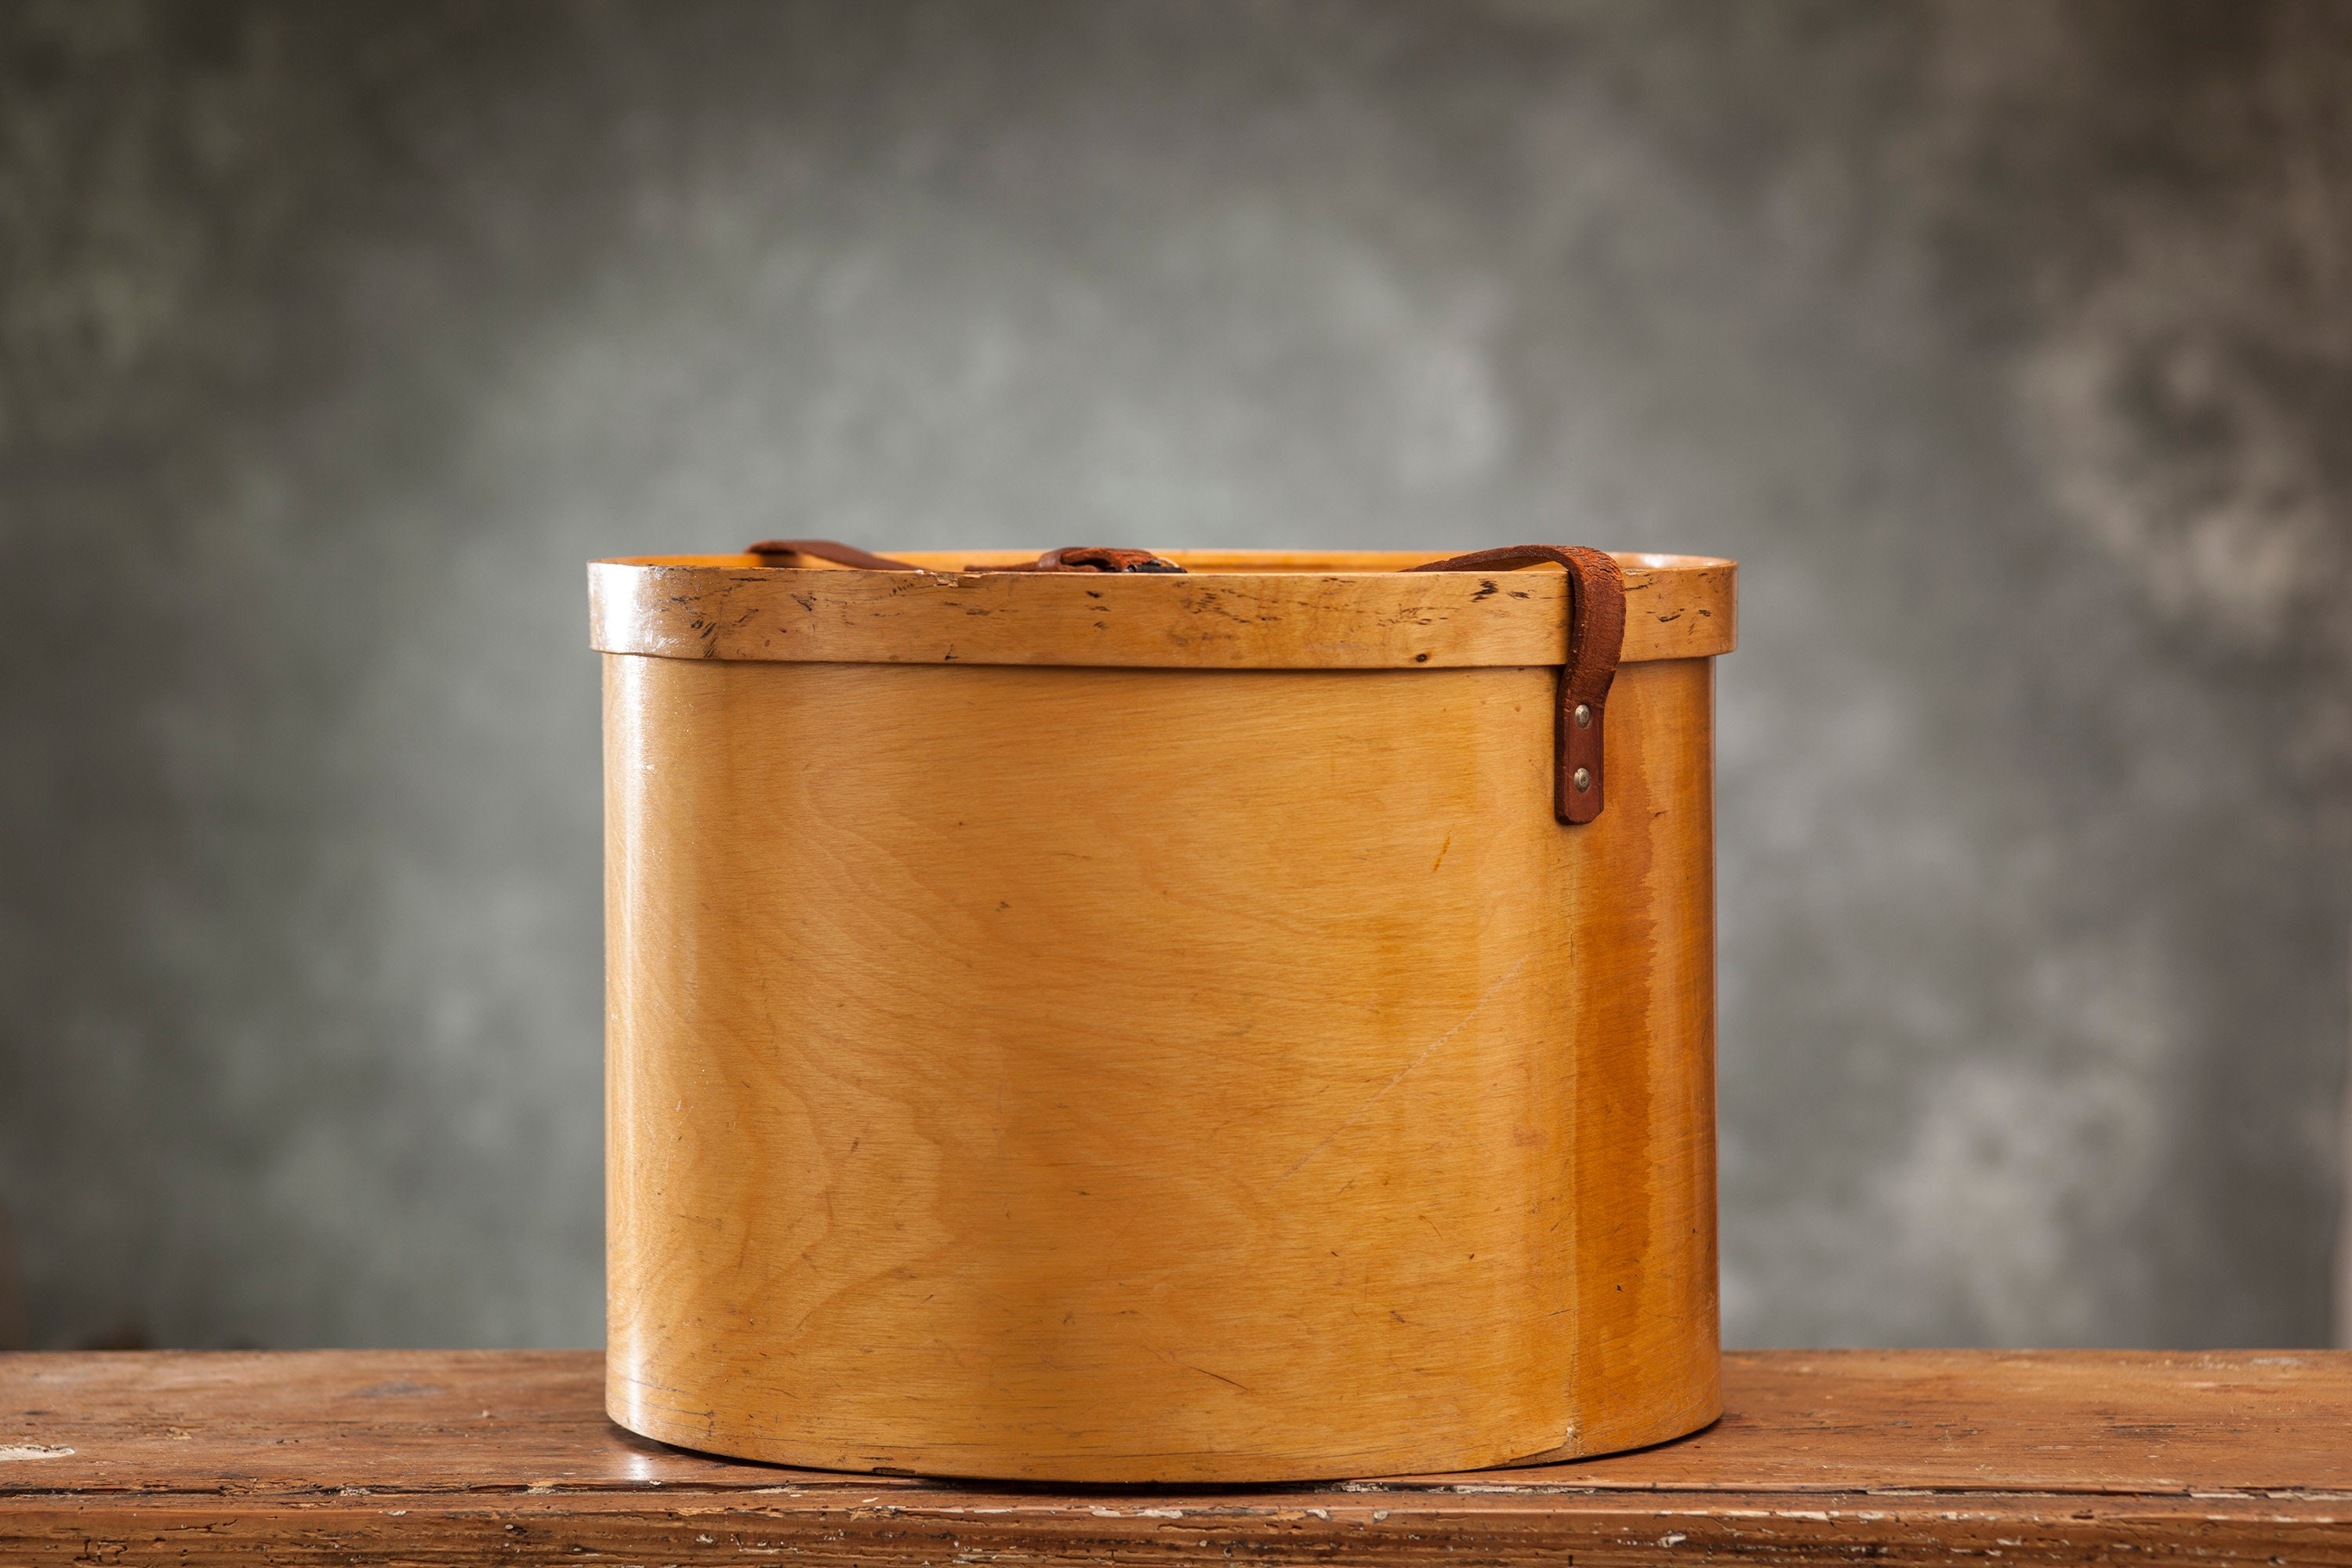 Mid-19th Century French Oval Pigskin Leather Top Hat Box from Paris